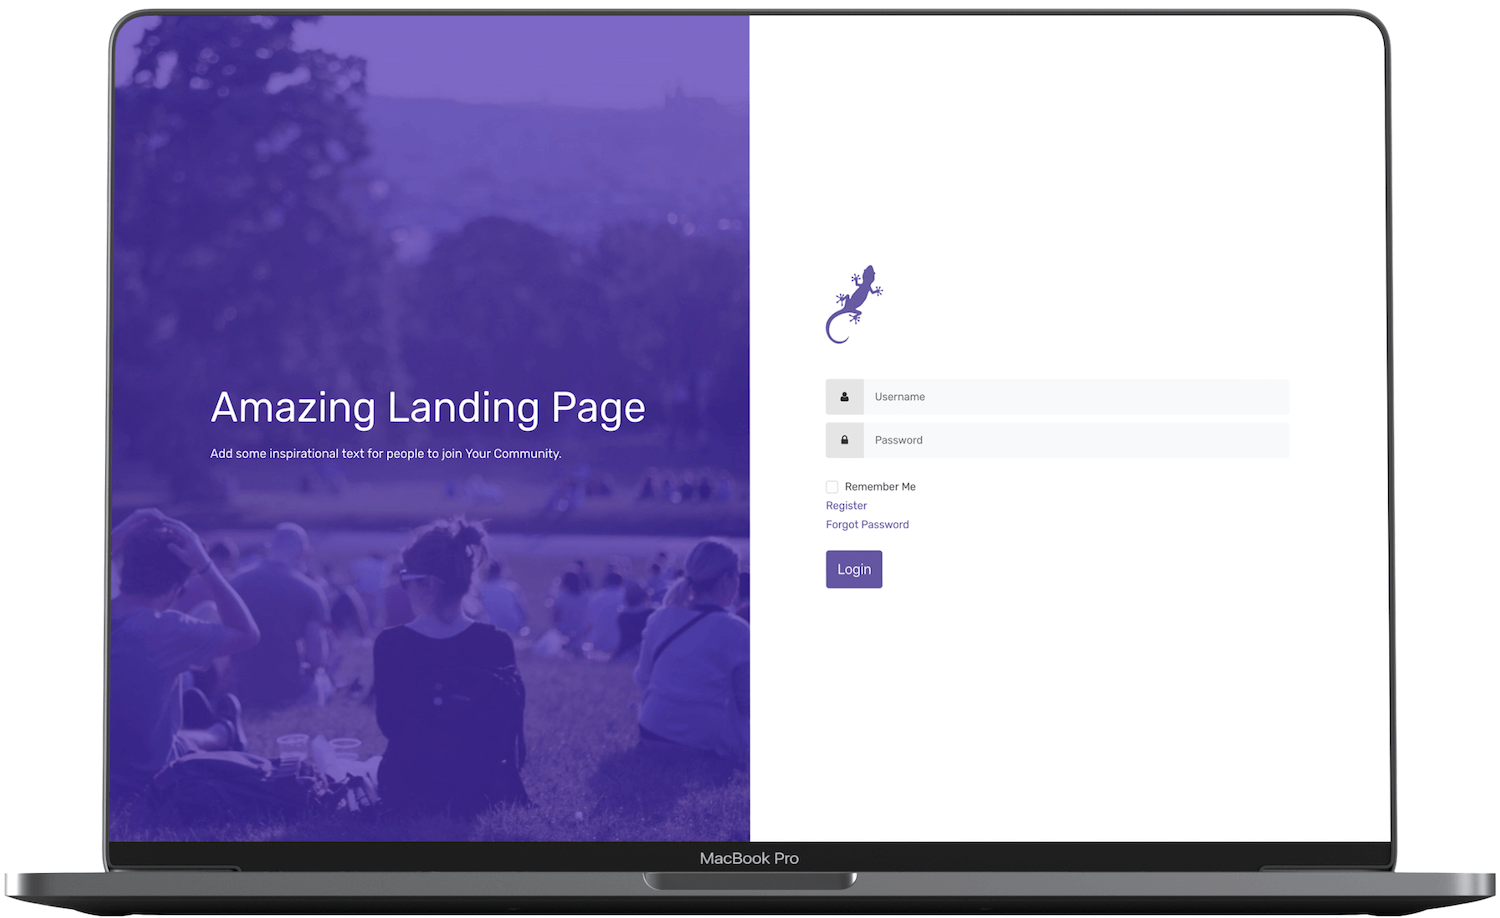 Landing Page presented on a laptop, full screen.